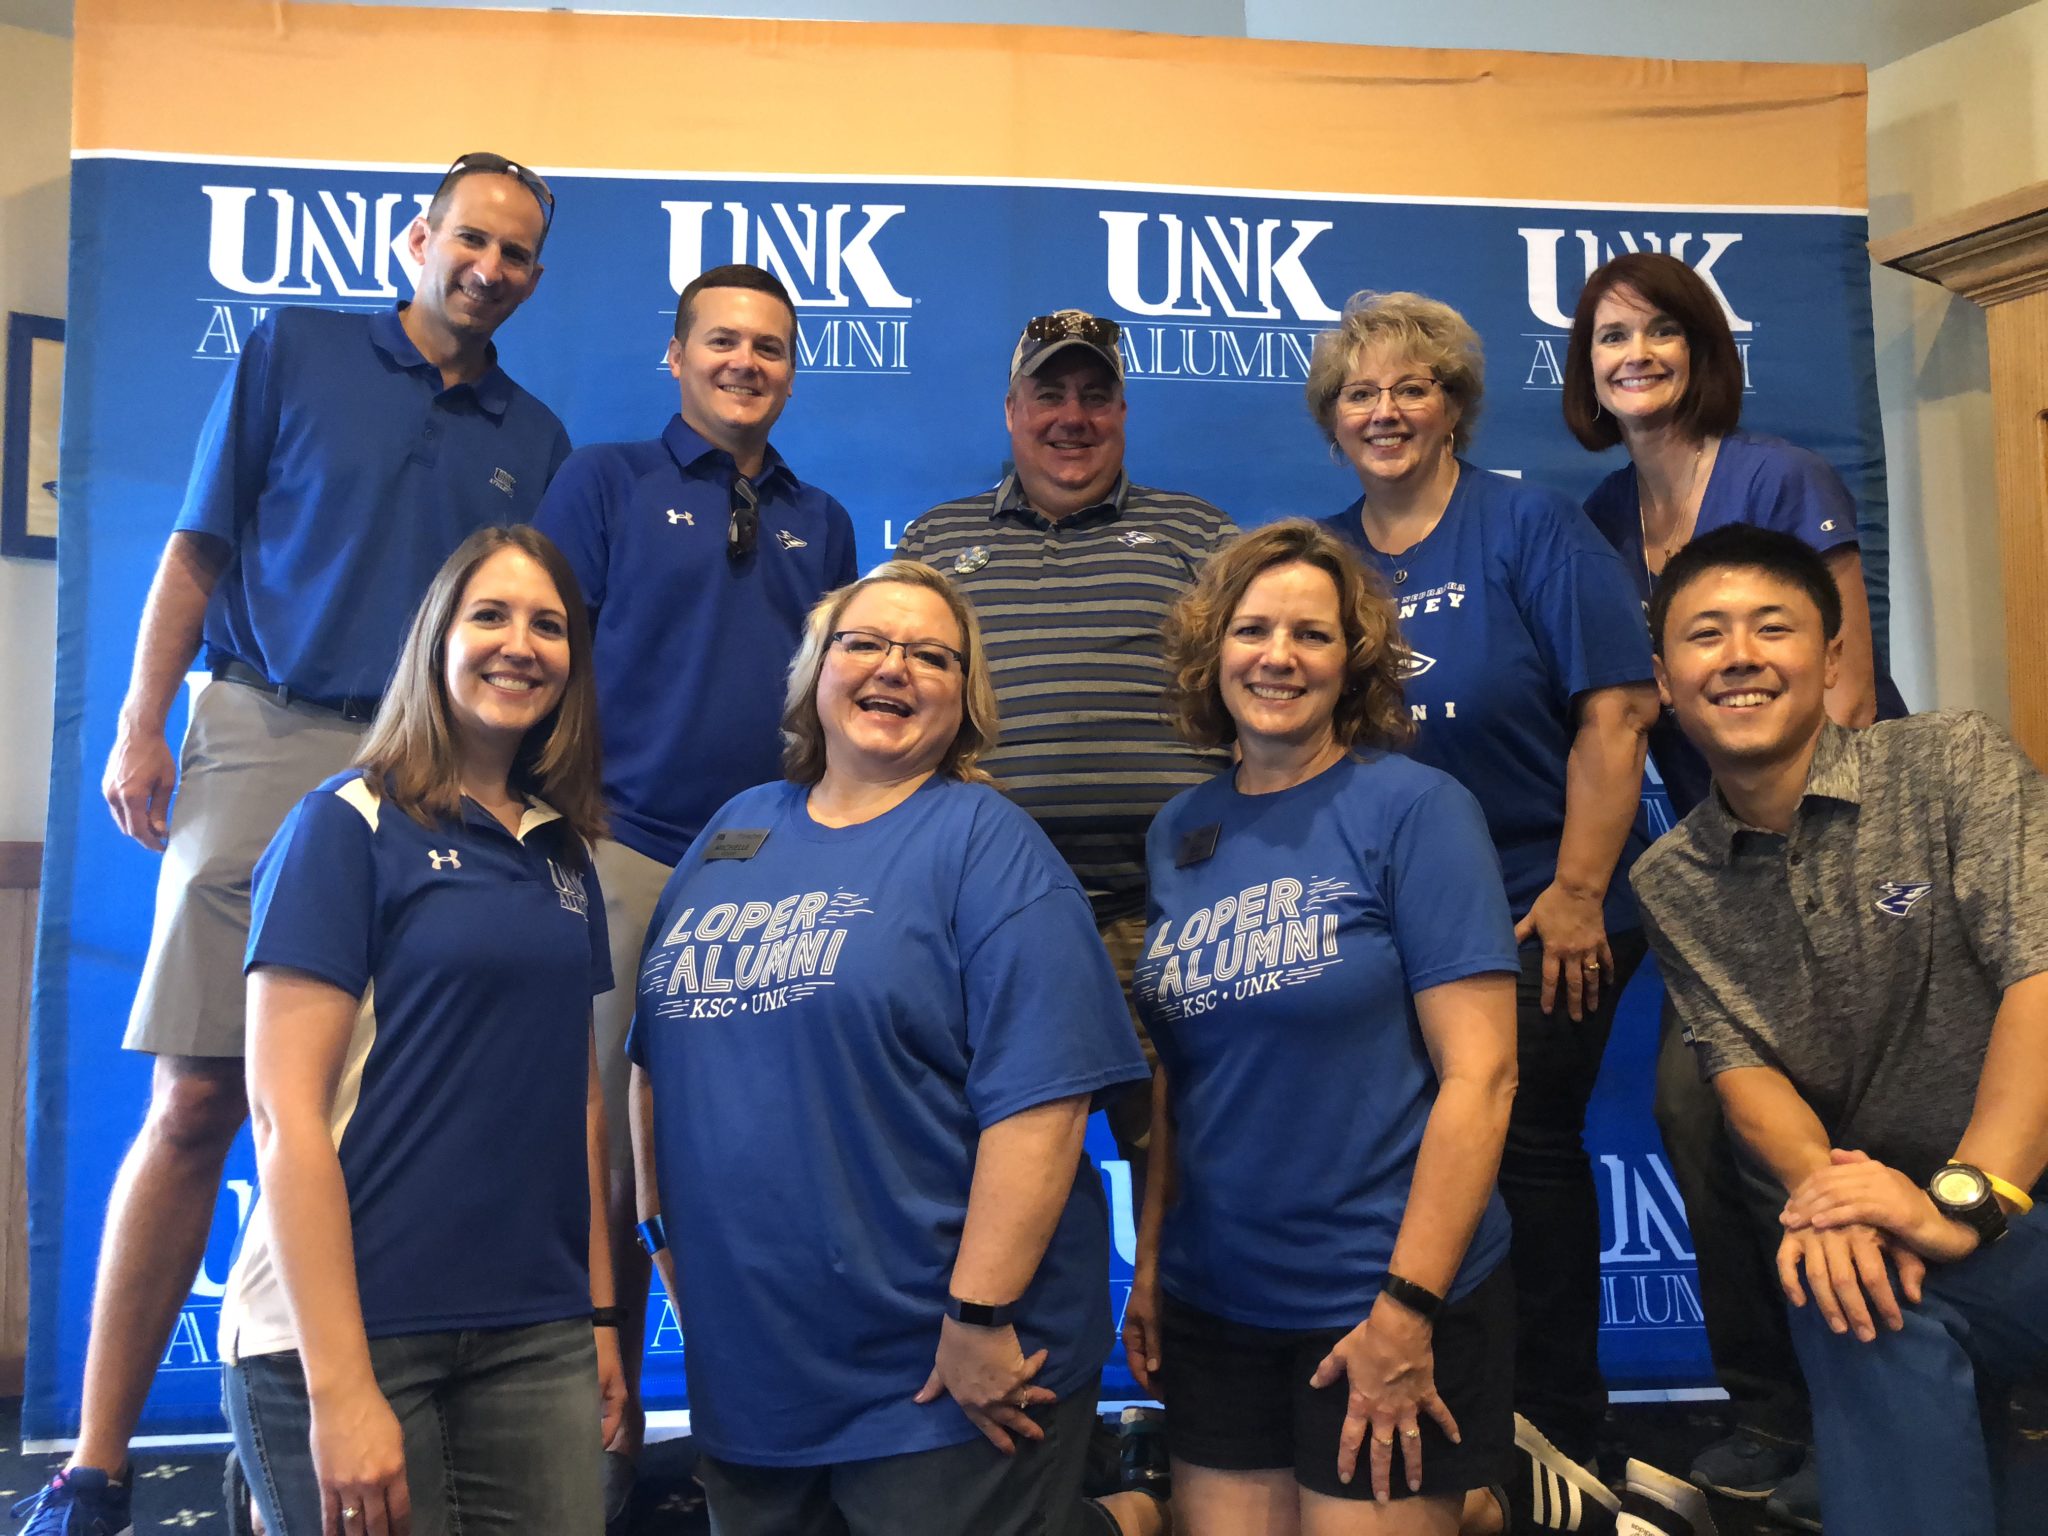 UNK Lead Council at Homecoming 2018